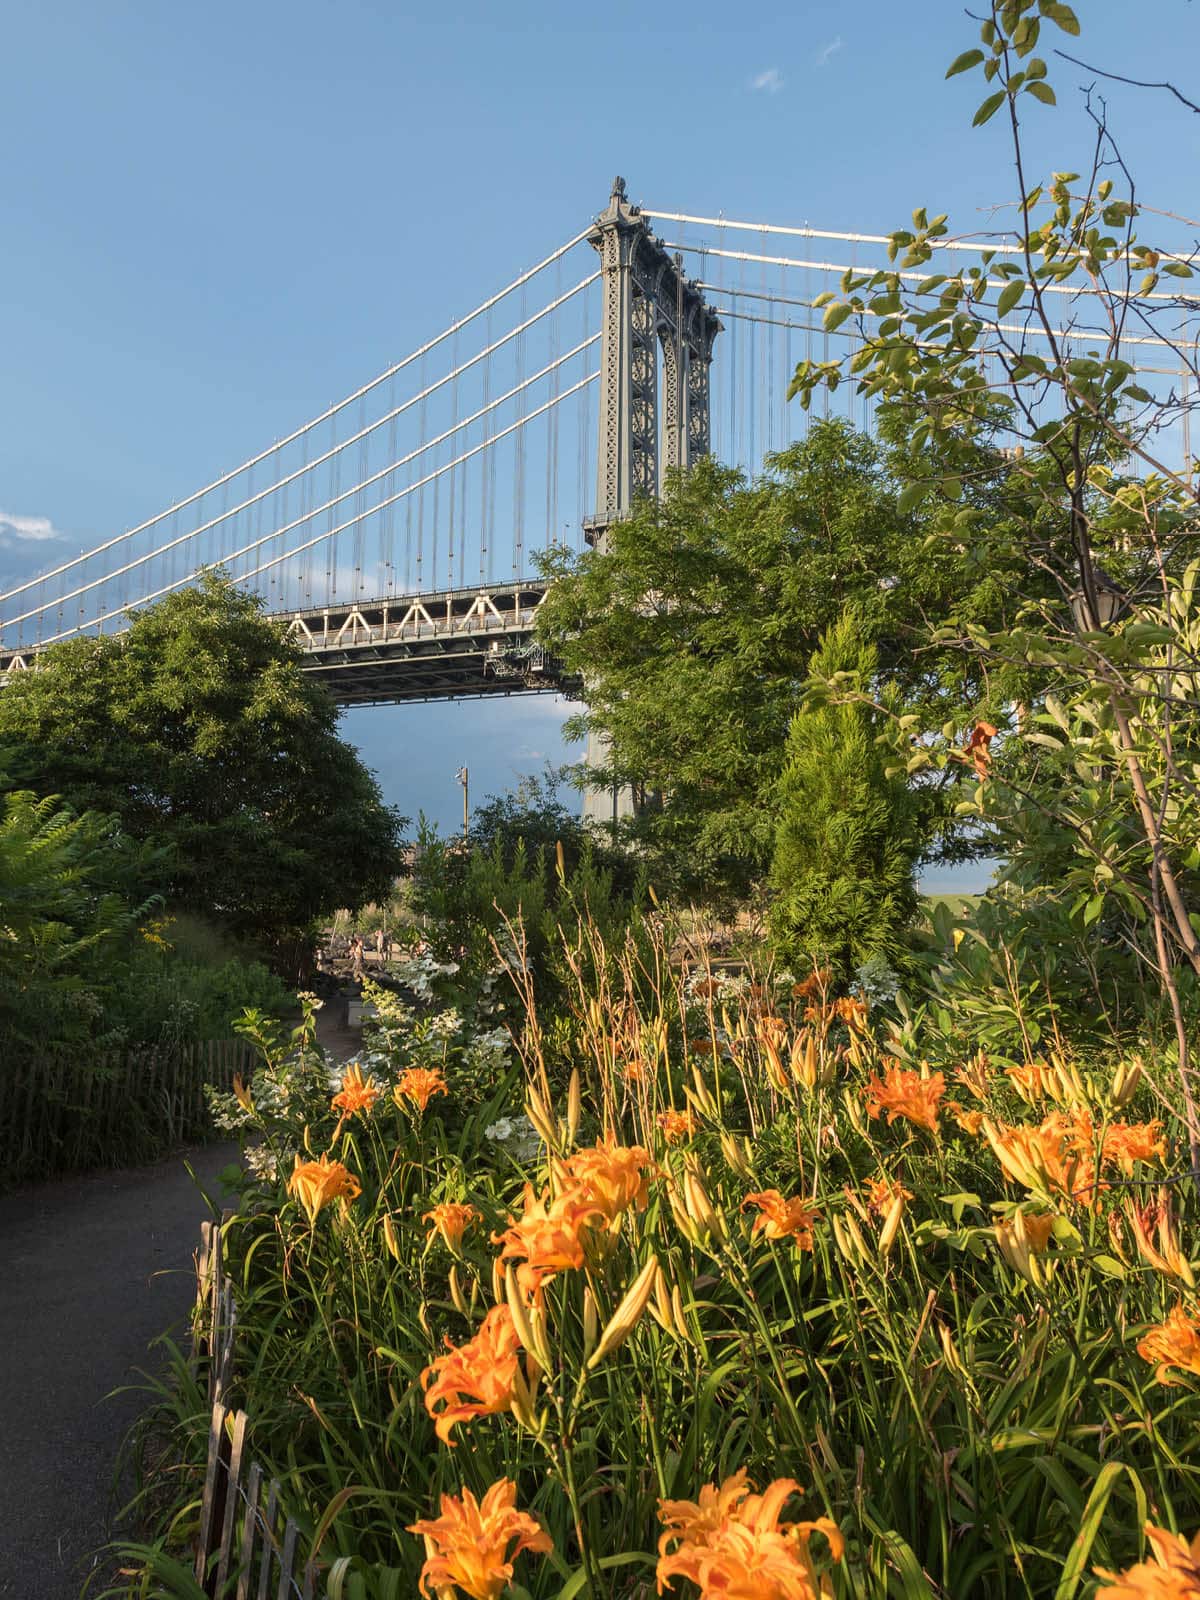 Yellow lilies by the pathway at sunset with the Manhattan Bridge overhead.